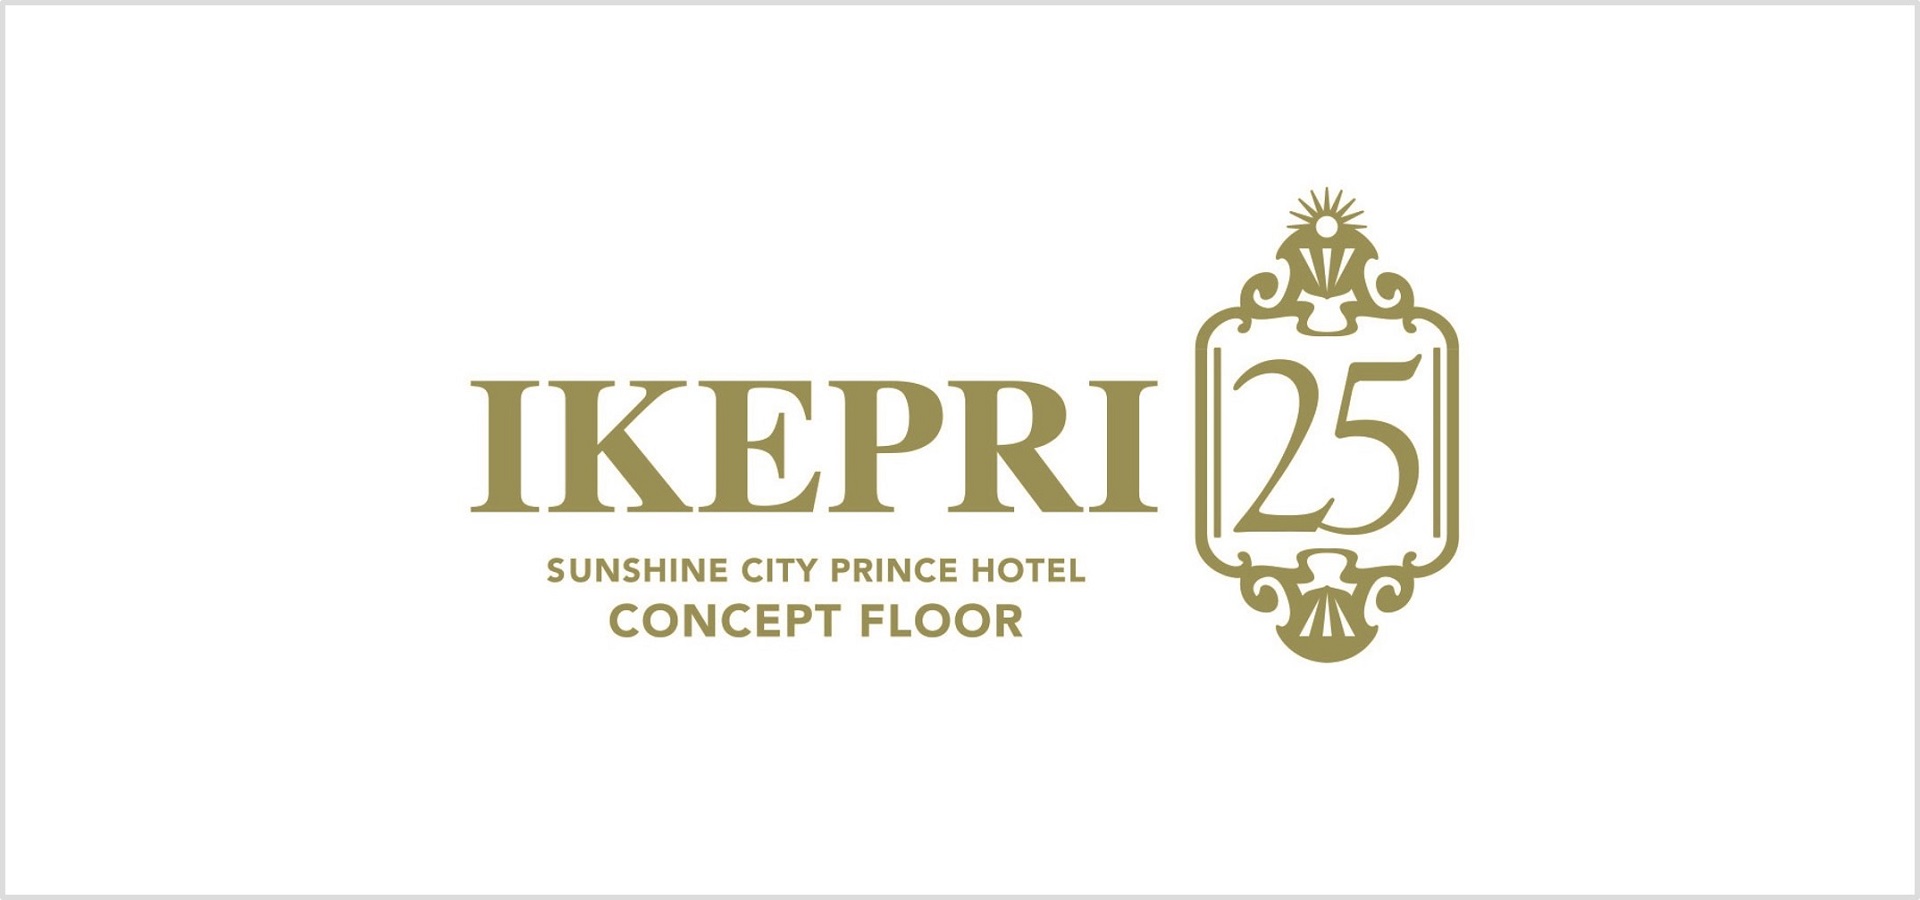 A Floor That Can Be Enjoyed by Overseas Fans Who Love Japanese Subculture – “IKEPRI 25” the Concept Floor, Has Opened in April 6th, 2019